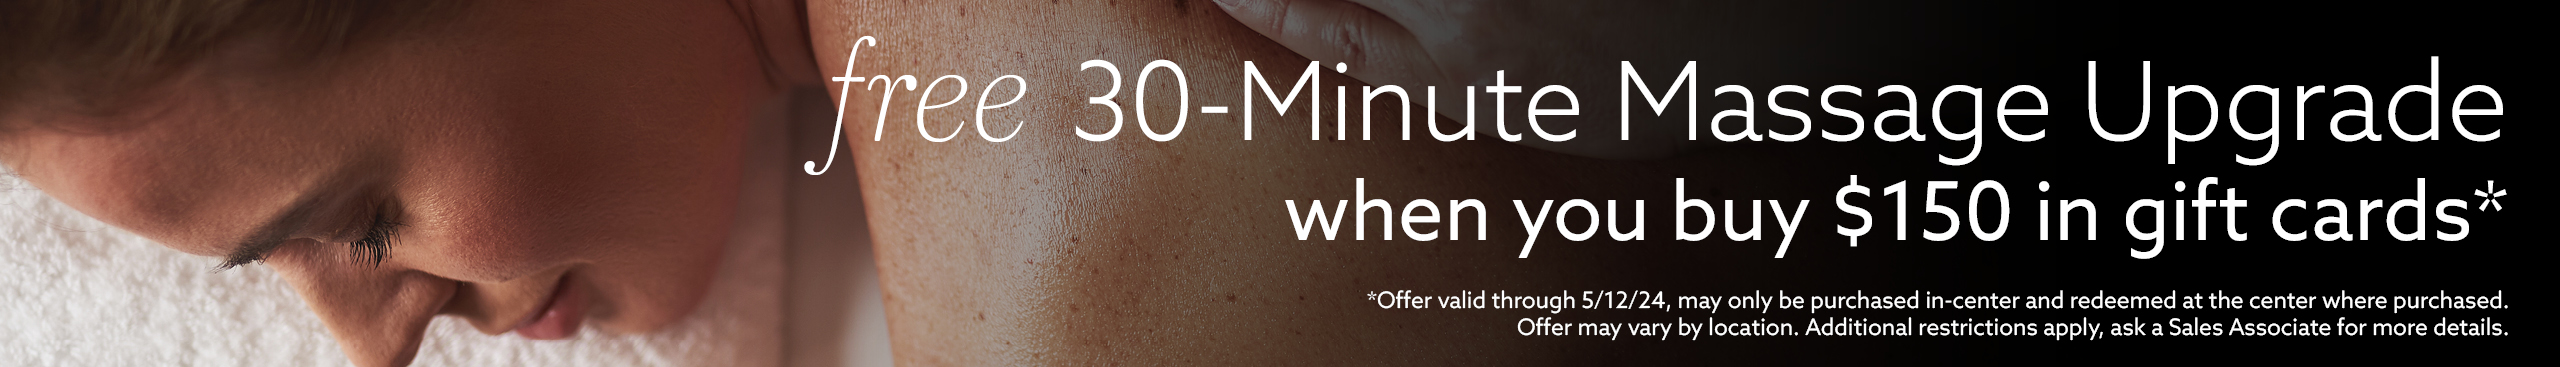 Buy $150 in Gift Cards, Get a free 30-minute massage upgrade